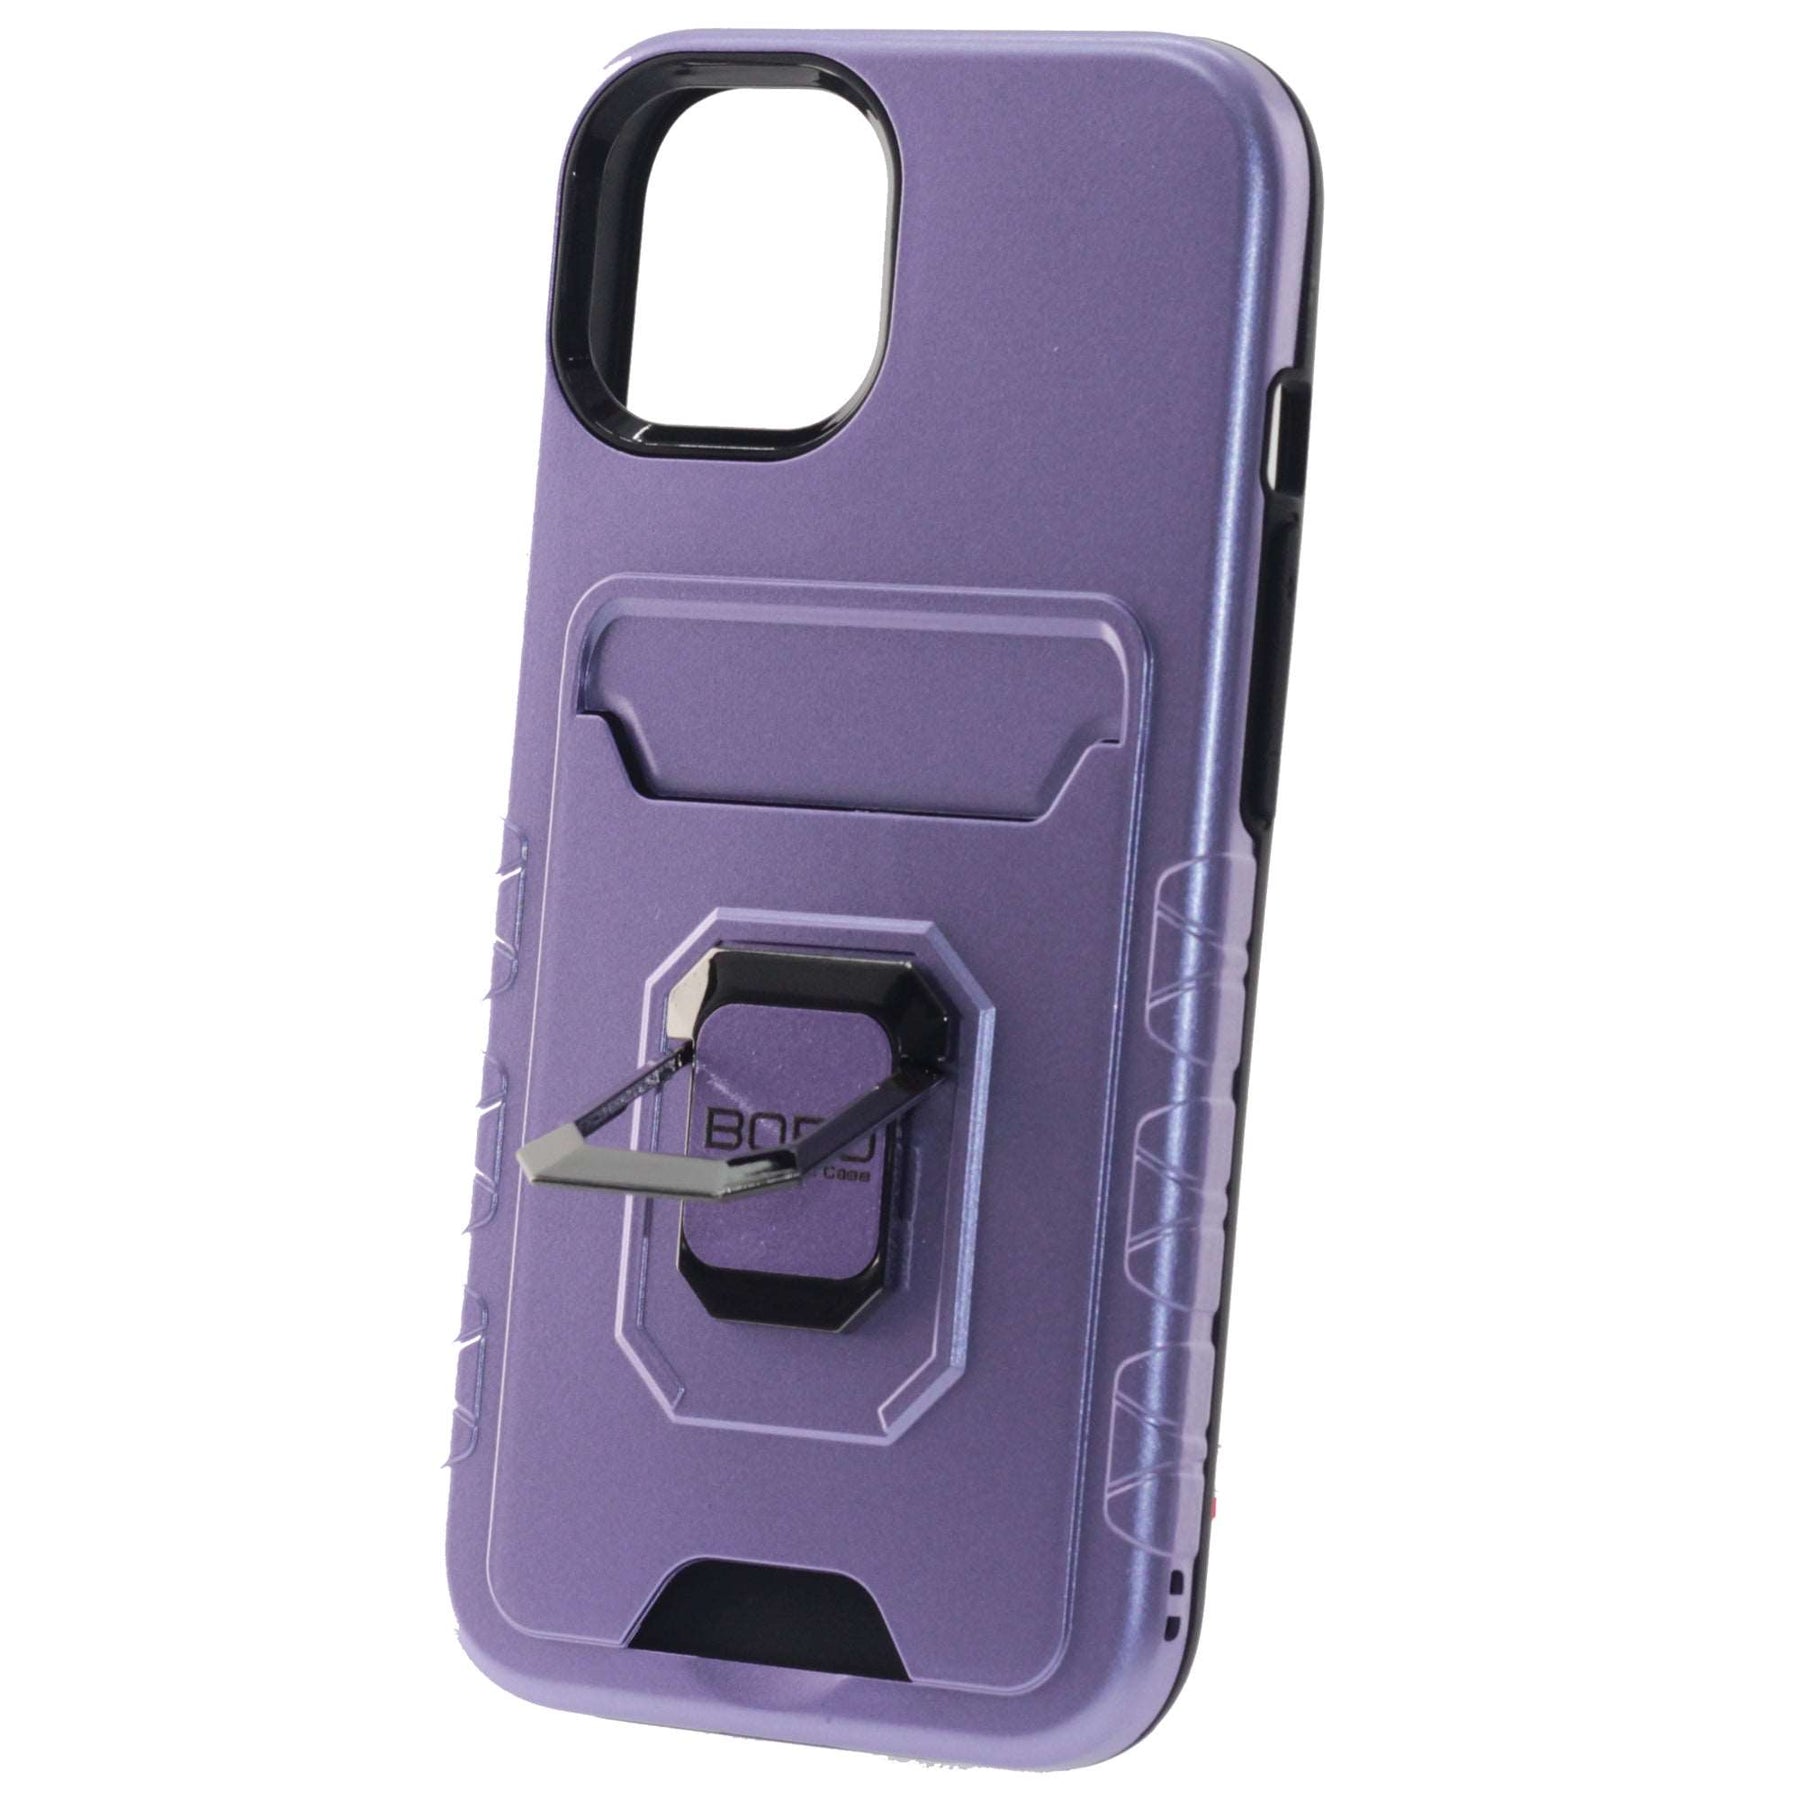 Apple iPhone 11 Pro Max, Case with Card Holder, Color Purple